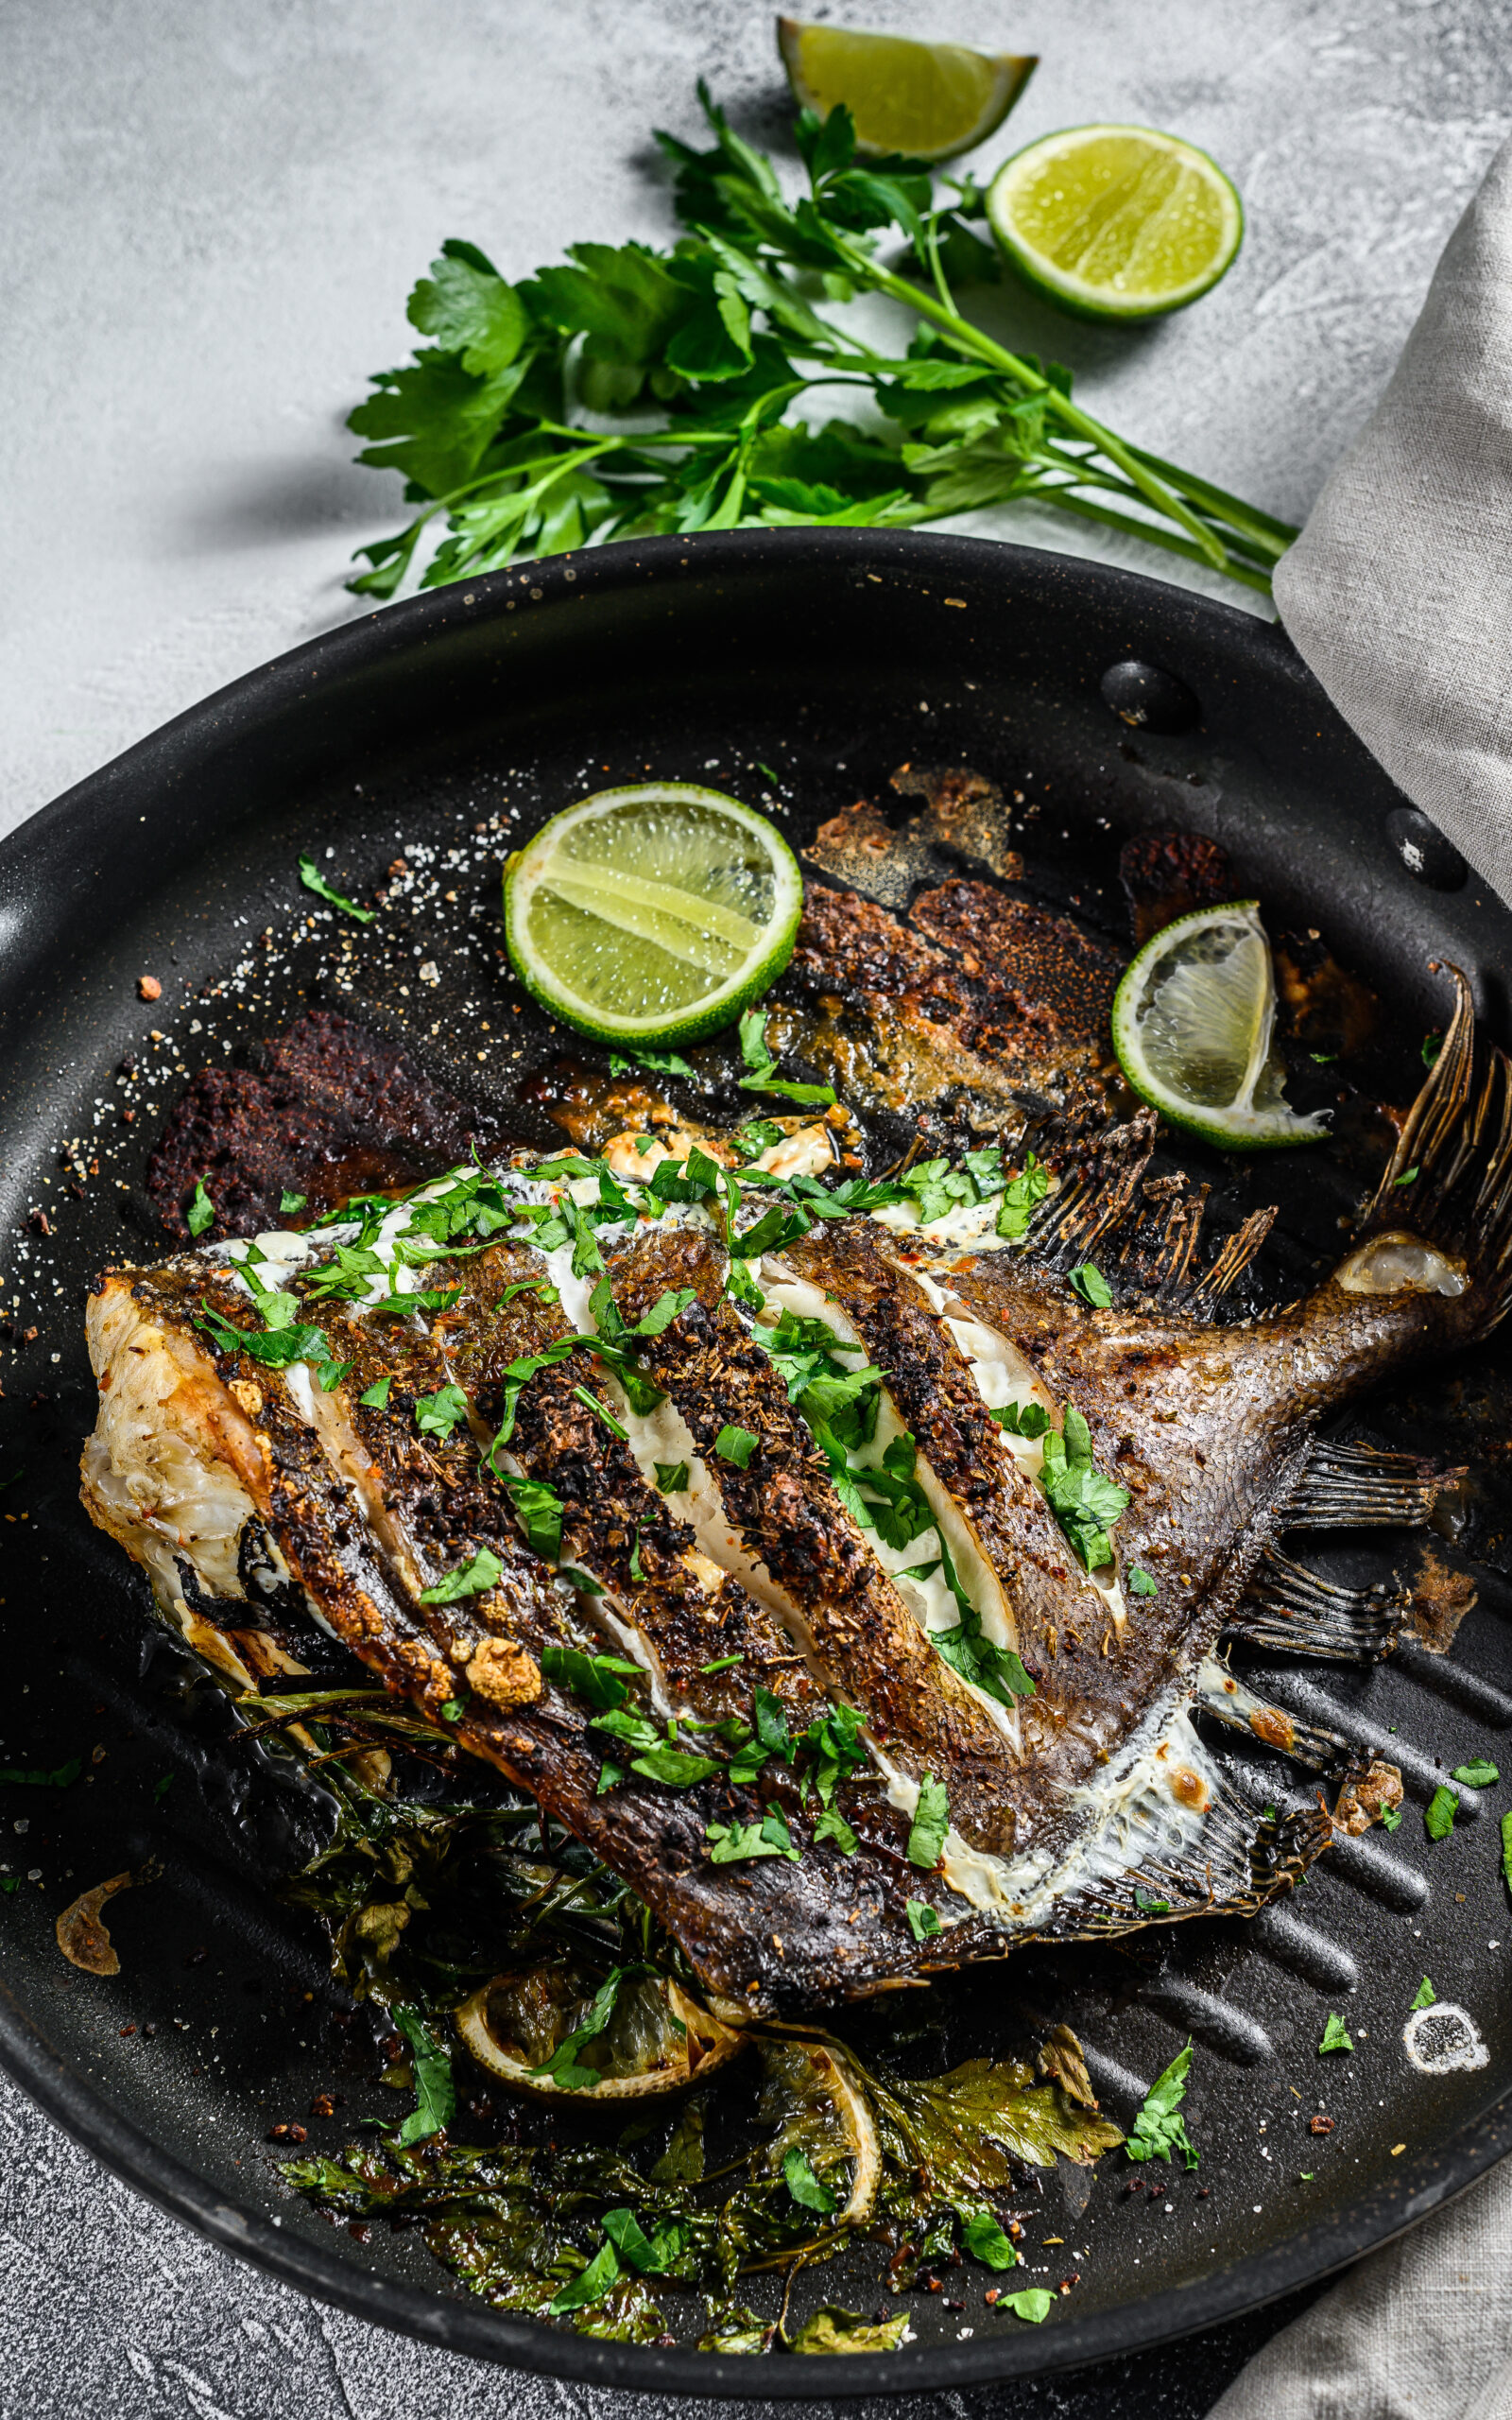 Grilled John Dory fish with lime and parsley in a pan. Gray background. Top view